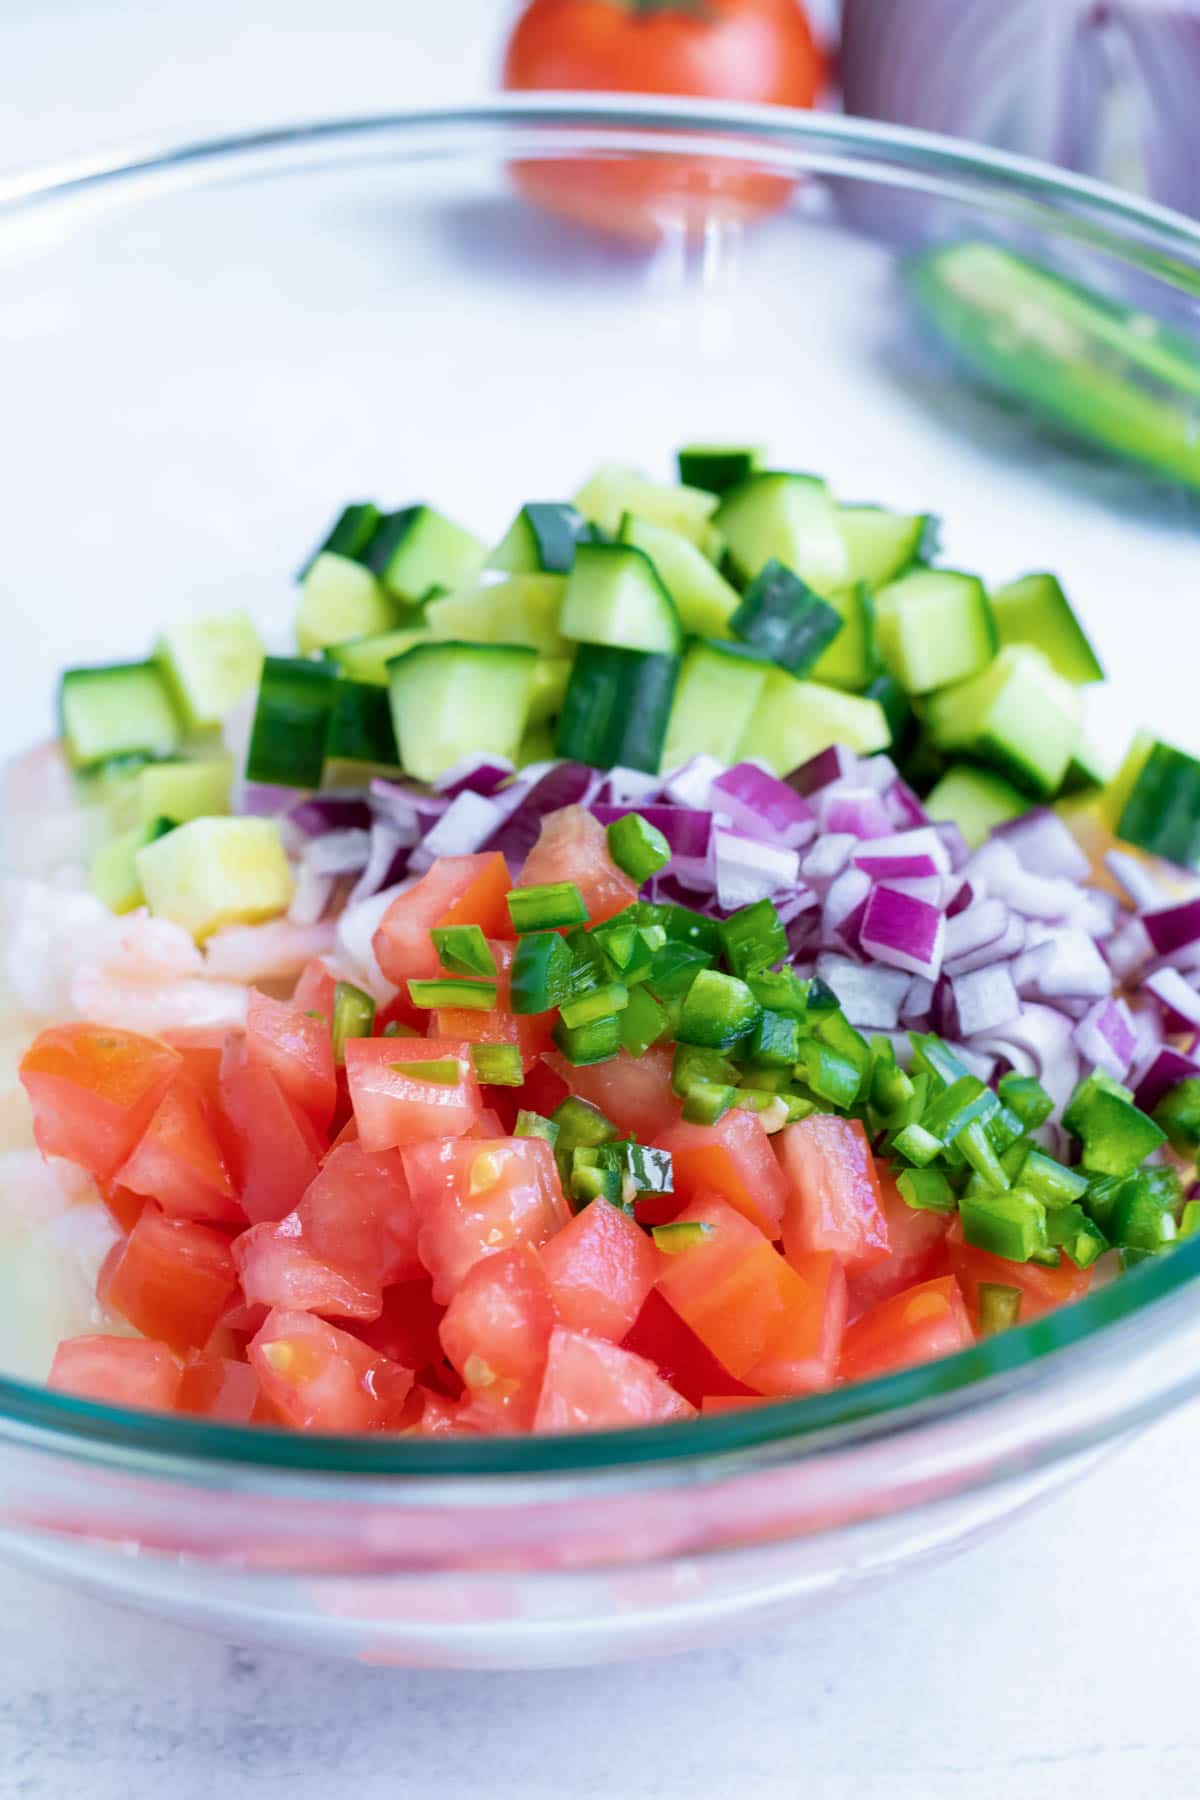 Diced vegetables are added to the shrimp ceviche.